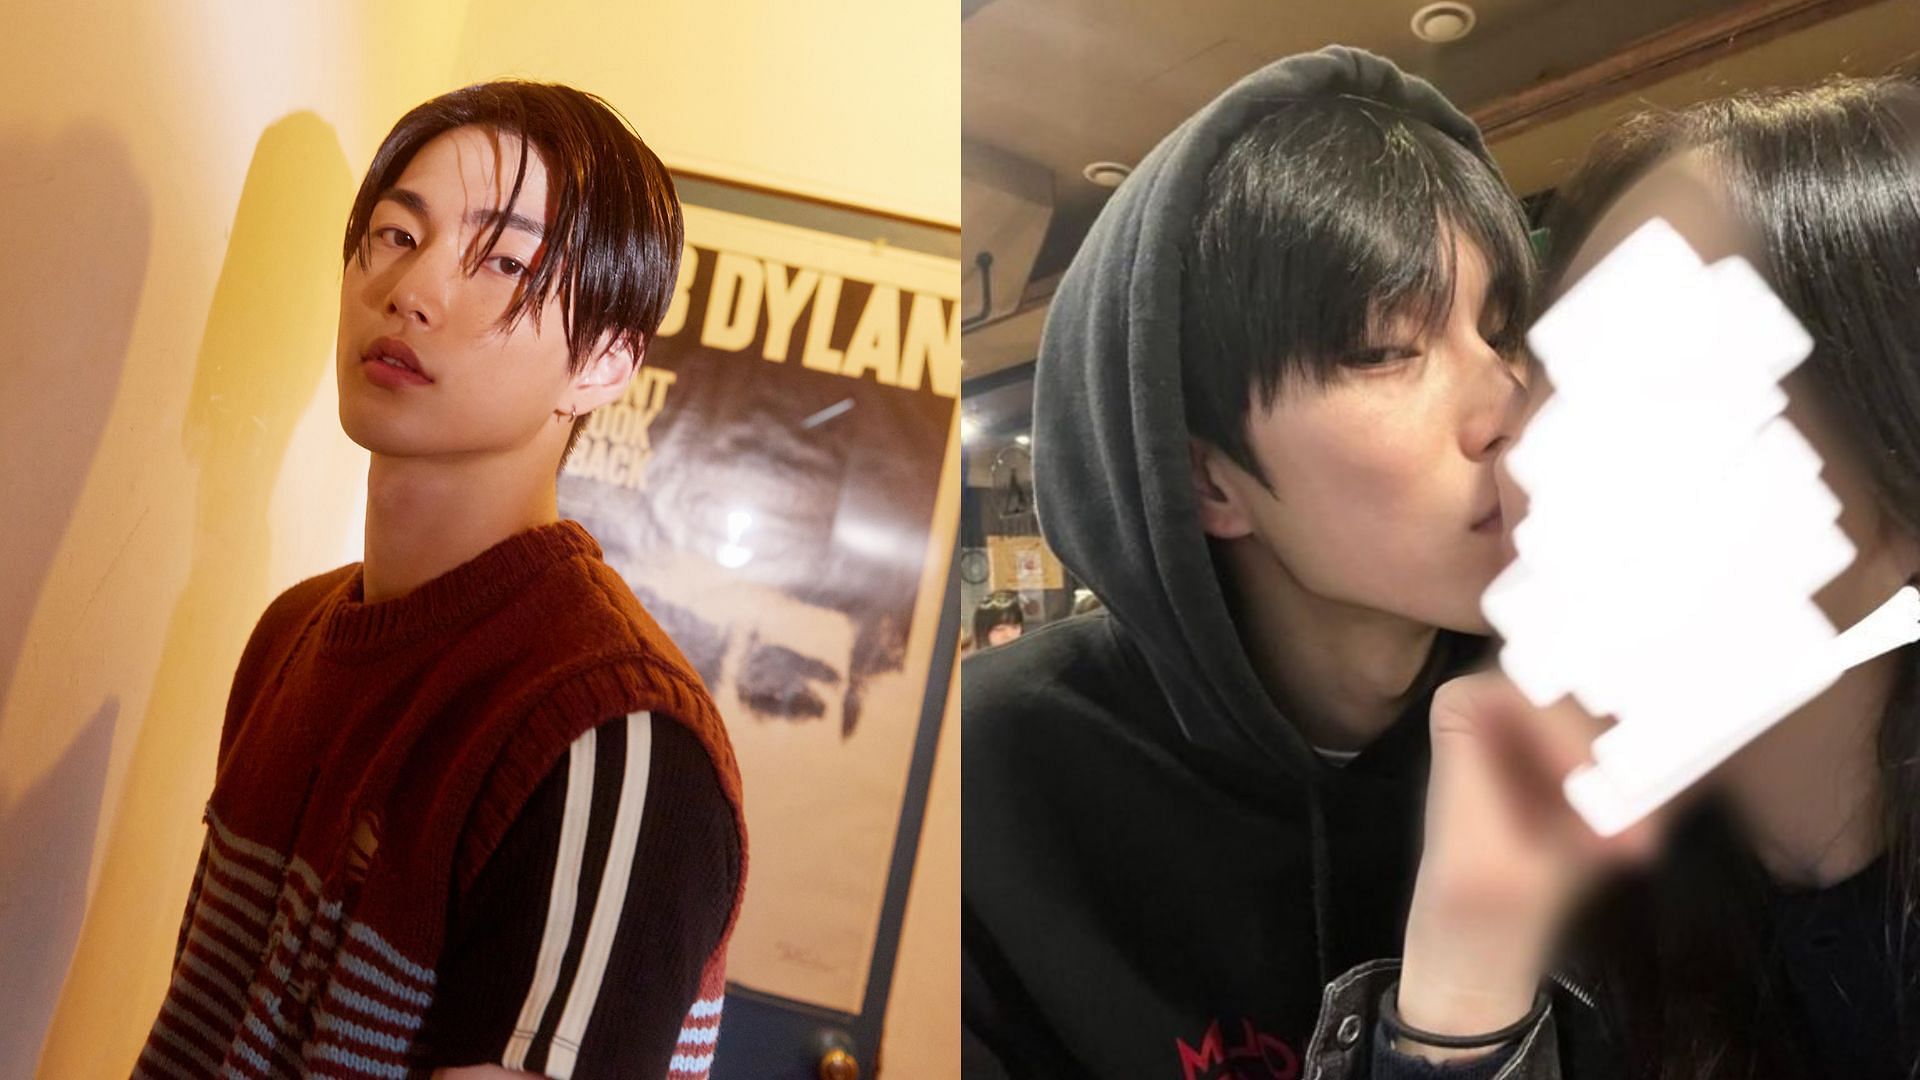 “I dont see the problem?”: Fans defend RIIZE’s Seunghan as photos of him allegedly kissing a woman go viral